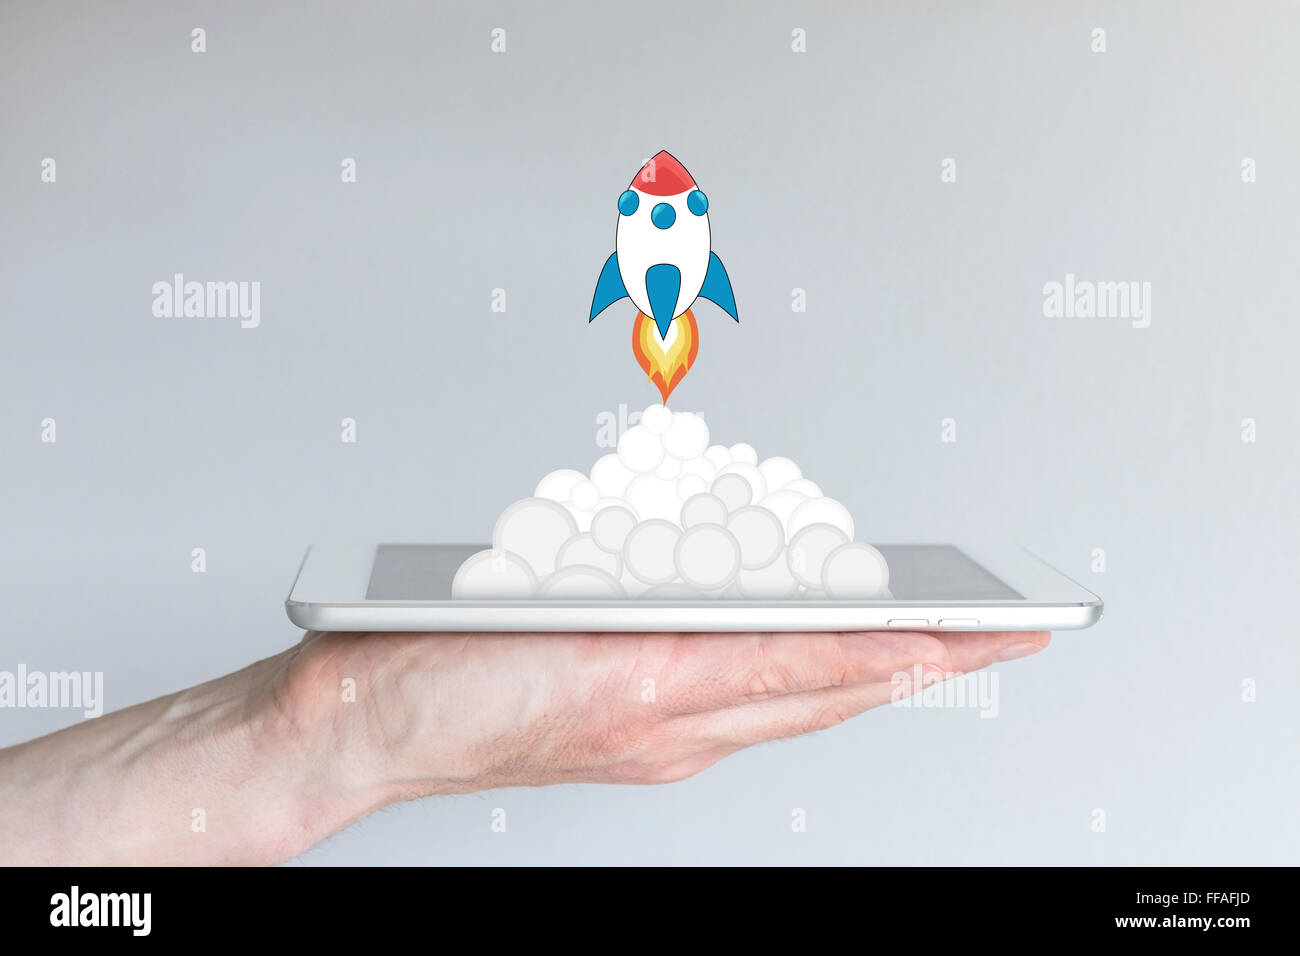 Concept of successful mobile computing business or strategy, e.g. for app development or business startups. Rocket launching fro Stock Photo